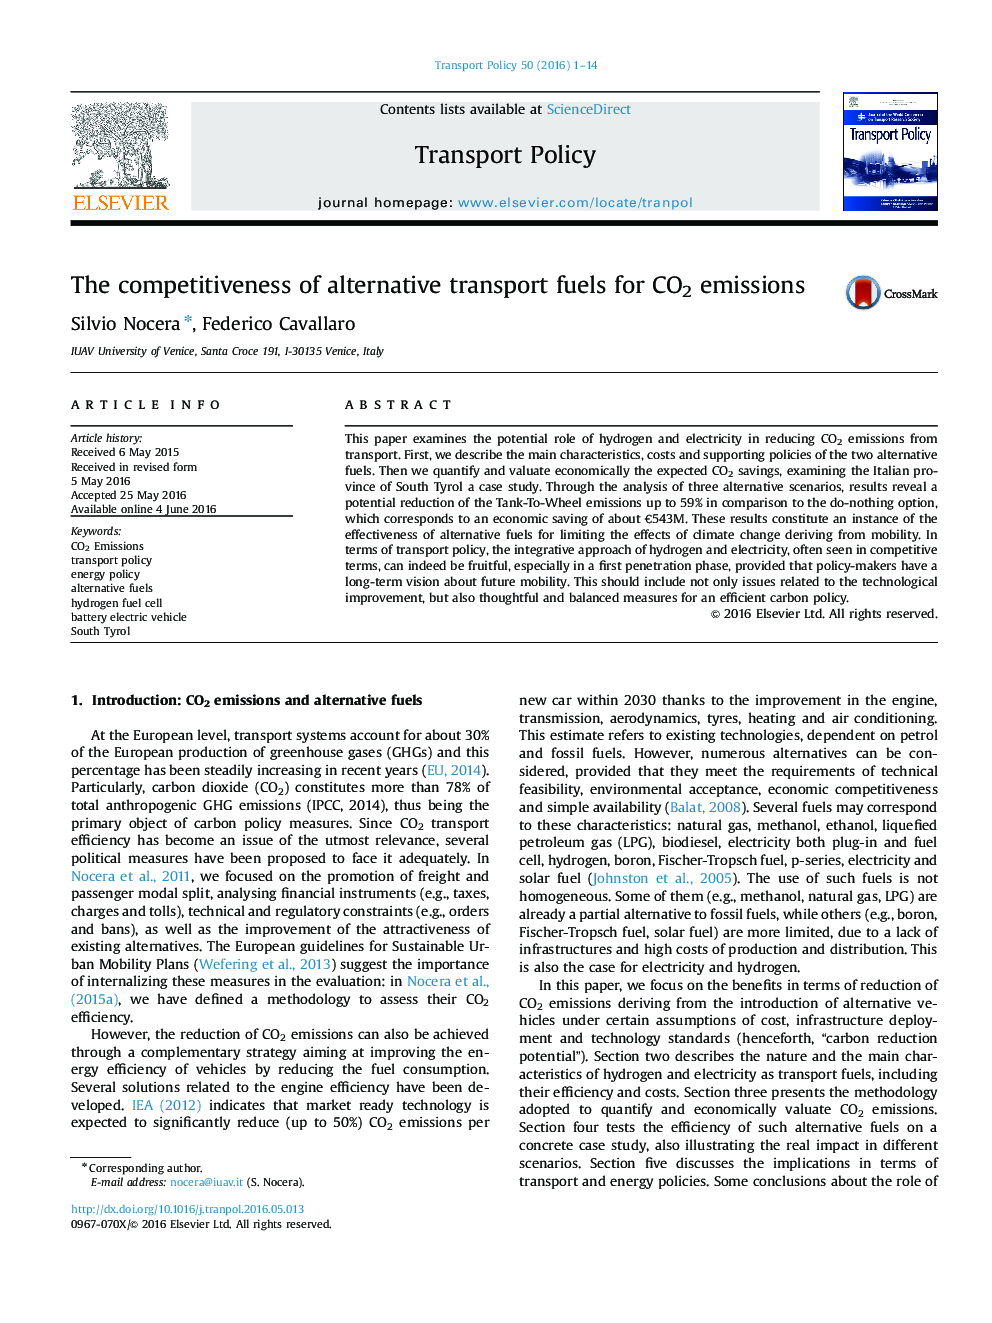 The competitiveness of alternative transport fuels for CO2 emissions